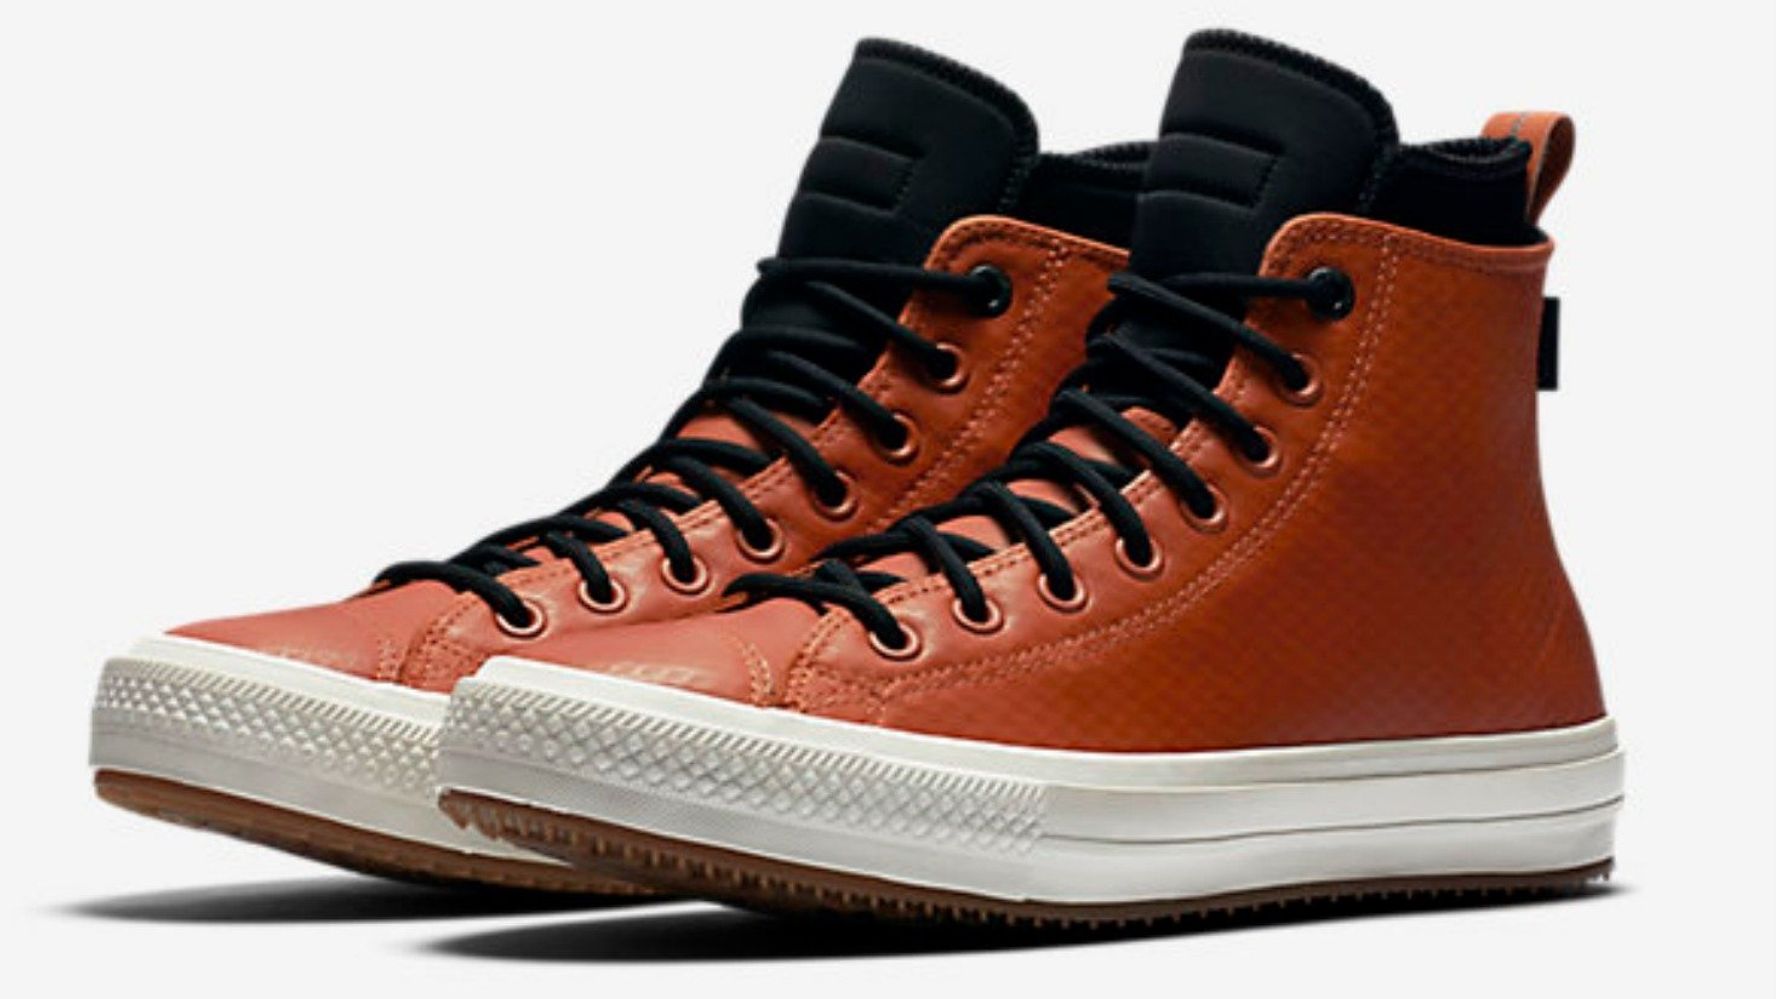 Waterproof Converse Are Here To Save Our Feet From Winter Weather | Life